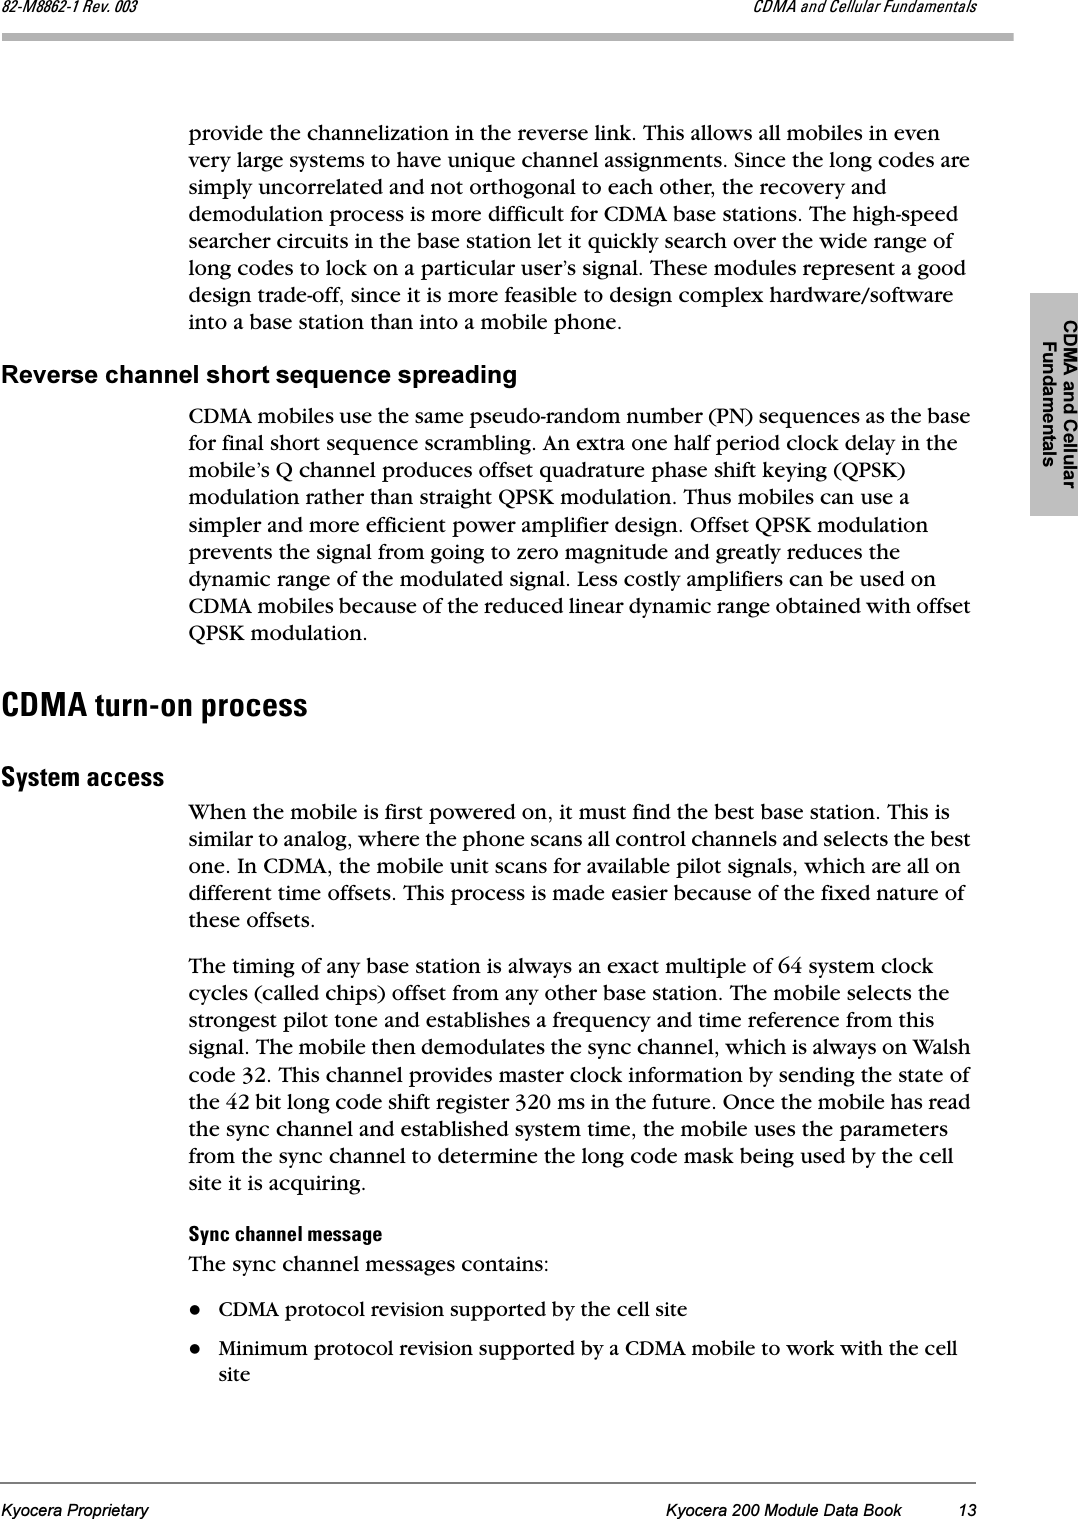 CDMA and Cellular FundamentalsKyocera Proprietary Kyocera 200 Module Data Book 13UOJjUUSOJN=oÉîK=MMP `aj^=~åÇ=`Éääìä~ê=cìåÇ~ãÉåí~äëprovide the channelization in the reverse link. This allows all mobiles in even very large systems to have unique channel assignments. Since the long codes are simply uncorrelated and not orthogonal to each other, the recovery and demodulation process is more difficult for CDMA base stations. The high-speed searcher circuits in the base station let it quickly search over the wide range of long codes to lock on a particular user’s signal. These modules represent a good design trade-off, since it is more feasible to design complex hardware/software into a base station than into a mobile phone.Reverse channel short sequence spreadingCDMA mobiles use the same pseudo-random number (PN) sequences as the base for final short sequence scrambling. An extra one half period clock delay in the mobile’s Q channel produces offset quadrature phase shift keying (QPSK) modulation rather than straight QPSK modulation. Thus mobiles can use a simpler and more efficient power amplifier design. Offset QPSK modulation prevents the signal from going to zero magnitude and greatly reduces the dynamic range of the modulated signal. Less costly amplifiers can be used on CDMA mobiles because of the reduced linear dynamic range obtained with offset QPSK modulation. `aj^=íìêåJçå=éêçÅÉëëpóëíÉã=~ÅÅÉëëWhen the mobile is first powered on, it must find the best base station. This is similar to analog, where the phone scans all control channels and selects the best one. In CDMA, the mobile unit scans for available pilot signals, which are all on different time offsets. This process is made easier because of the fixed nature of these offsets. The timing of any base station is always an exact multiple of 64 system clock cycles (called chips) offset from any other base station. The mobile selects the strongest pilot tone and establishes a frequency and time reference from this signal. The mobile then demodulates the sync channel, which is always on Walsh code 32. This channel provides master clock information by sending the state of the 42 bit long code shift register 320 ms in the future. Once the mobile has read the sync channel and established system time, the mobile uses the parameters from the sync channel to determine the long code mask being used by the cell site it is acquiring.póåÅ=ÅÜ~ååÉä=ãÉëë~ÖÉThe sync channel messages contains:CDMA protocol revision supported by the cell siteMinimum protocol revision supported by a CDMA mobile to work with the cell site